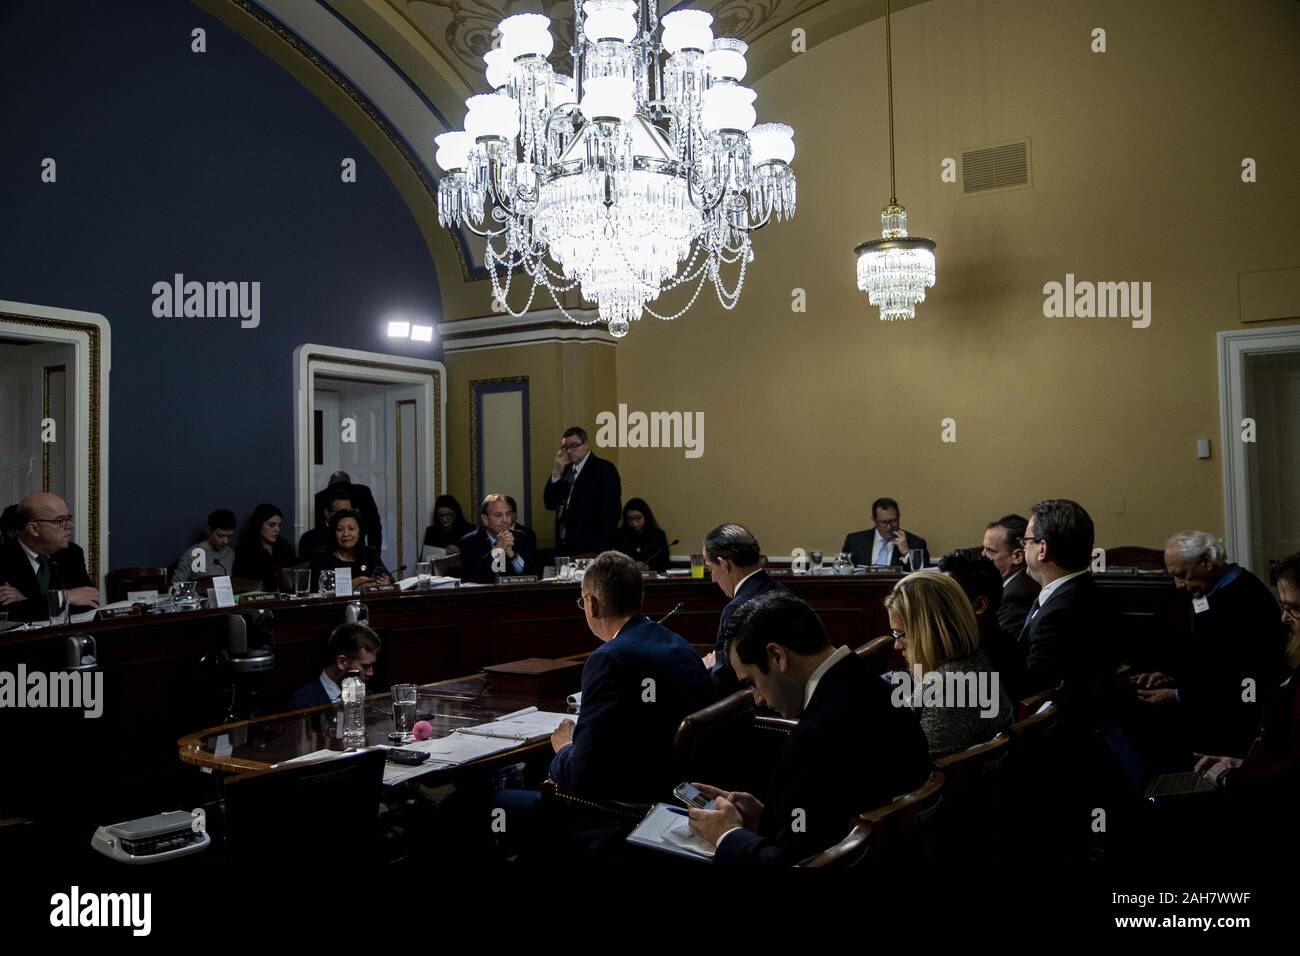 Washington, District of Columbia, USA. 17th Dec, 2019. Testimony during the United States House Committee on Rules hearing to consider H. Res. 755 ''Impeaching Donald John Trump, President of the United States, for high crimes and misdemeanors'' in Washington, DC on Tuesday, December 17, 2019 Credit: Anna Moneymaker/CNP/ZUMA Wire/Alamy Live News Stock Photo